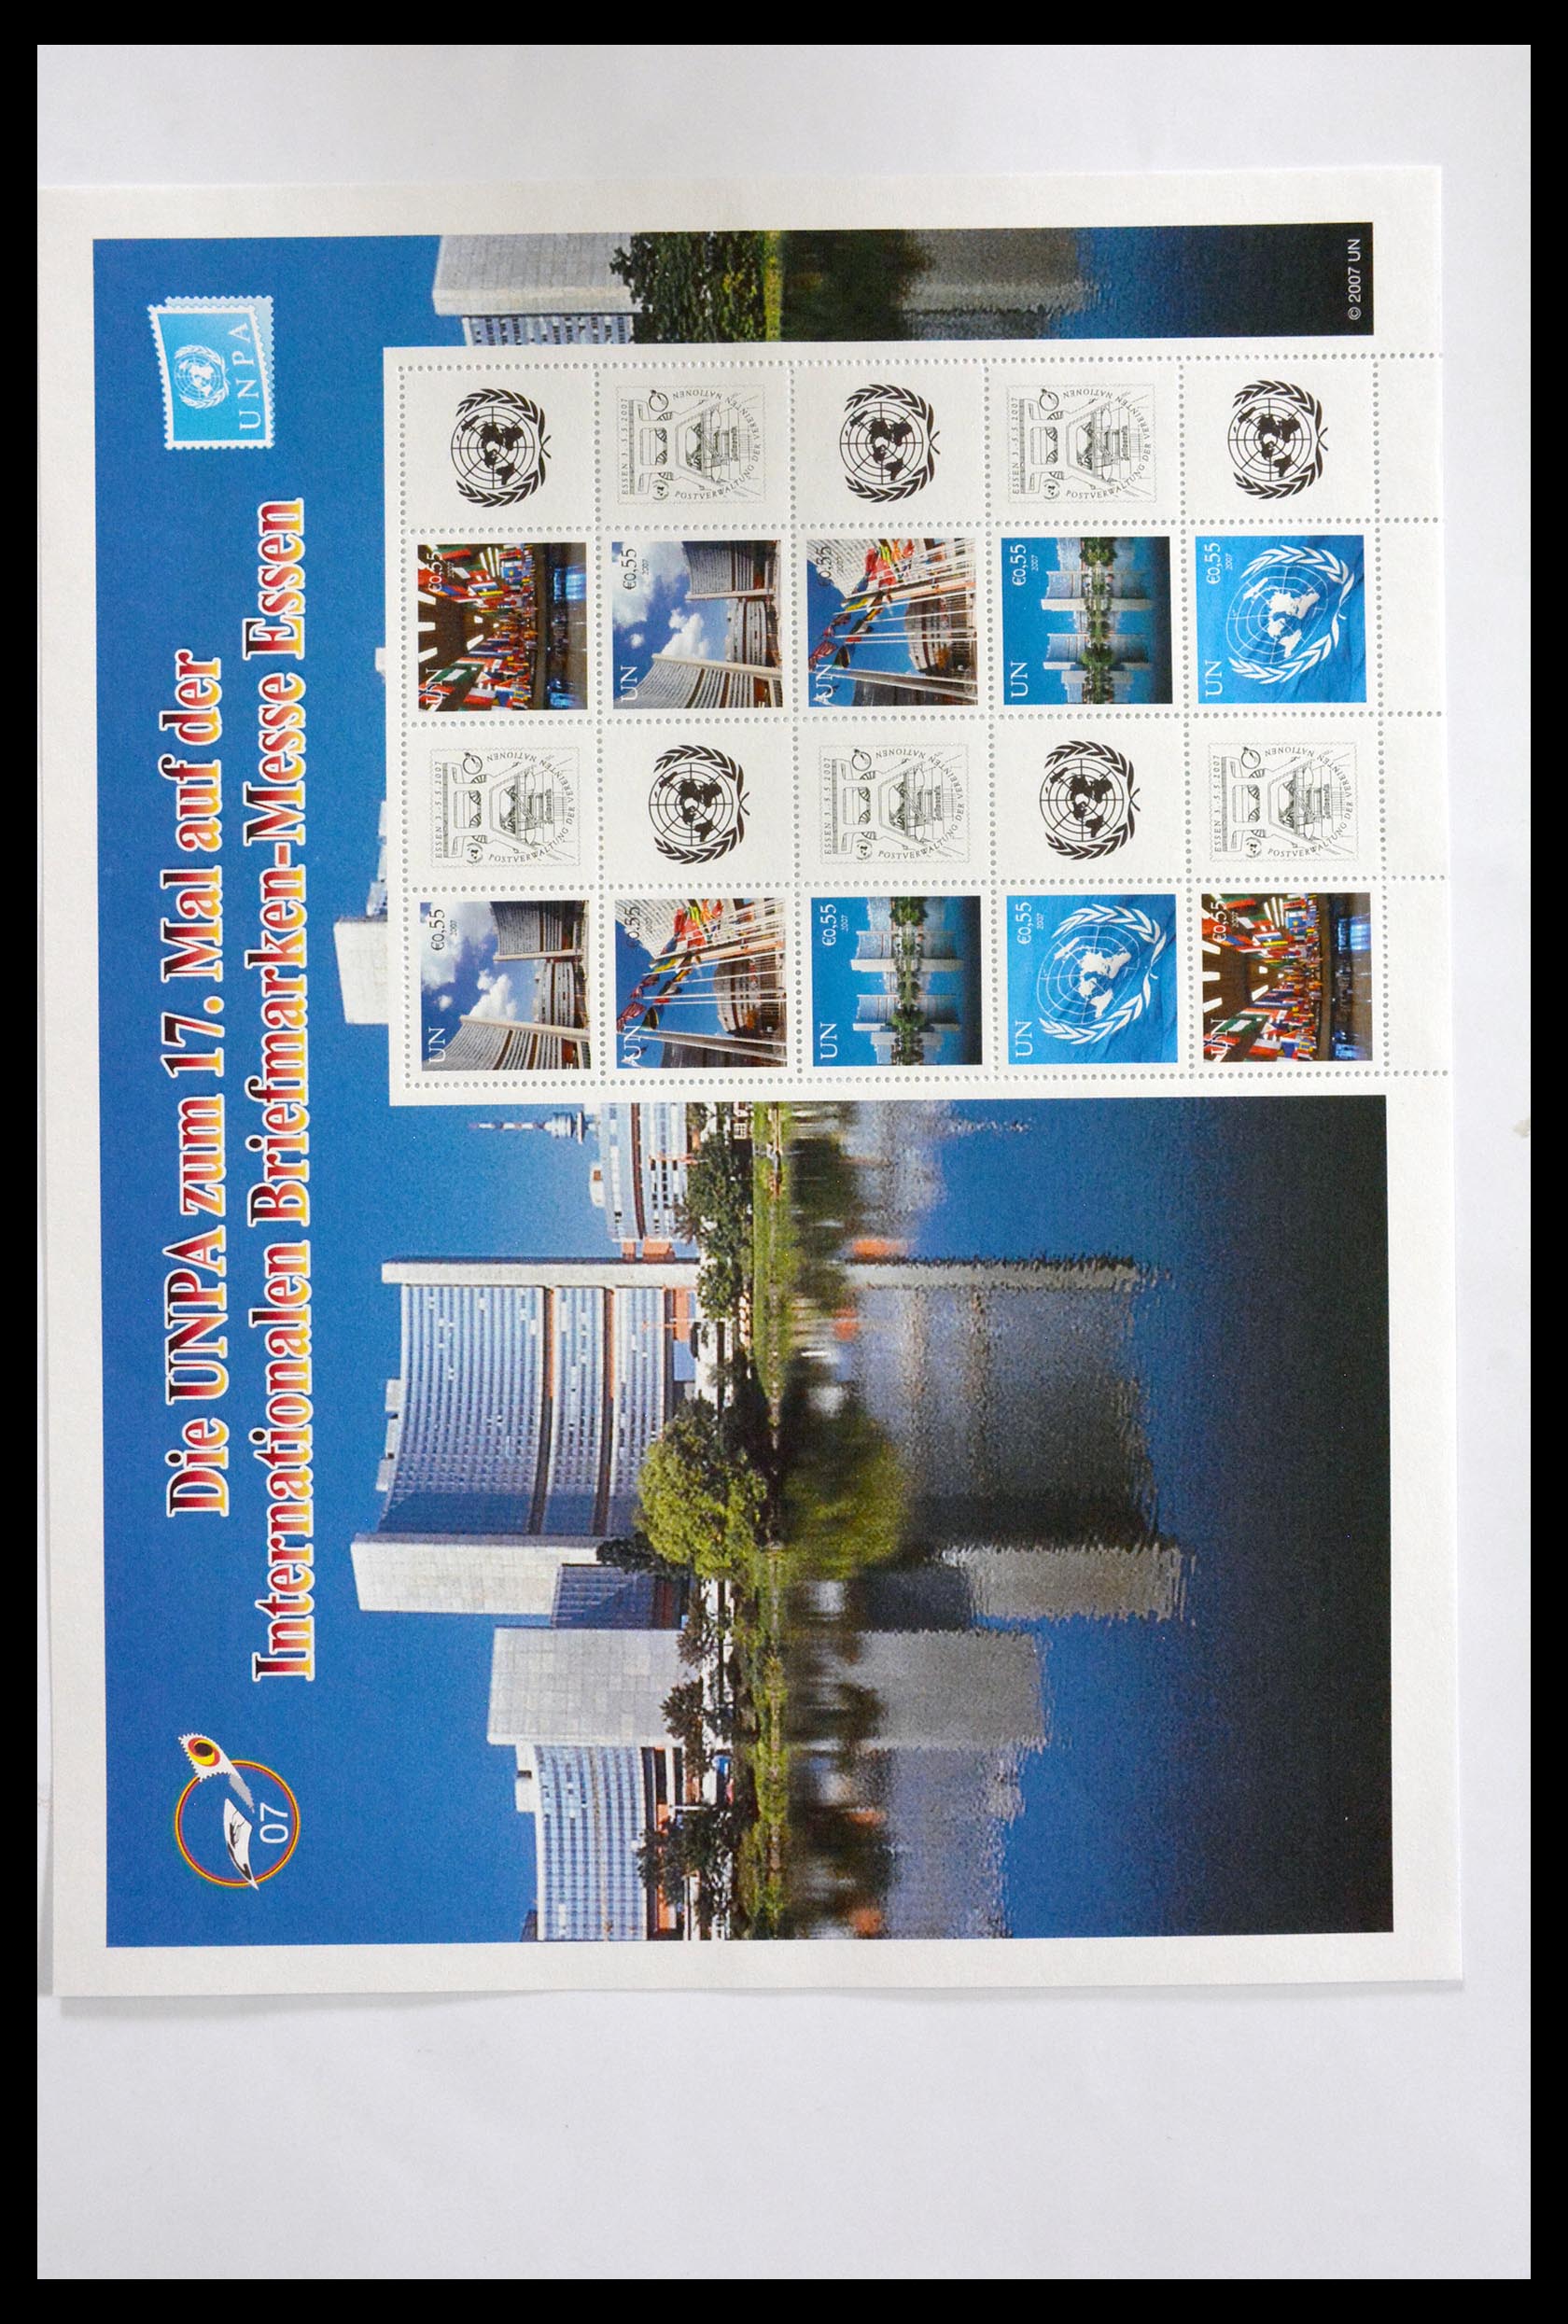 29721 014 - 29721 United Nations personalised sheets 2003-2010.